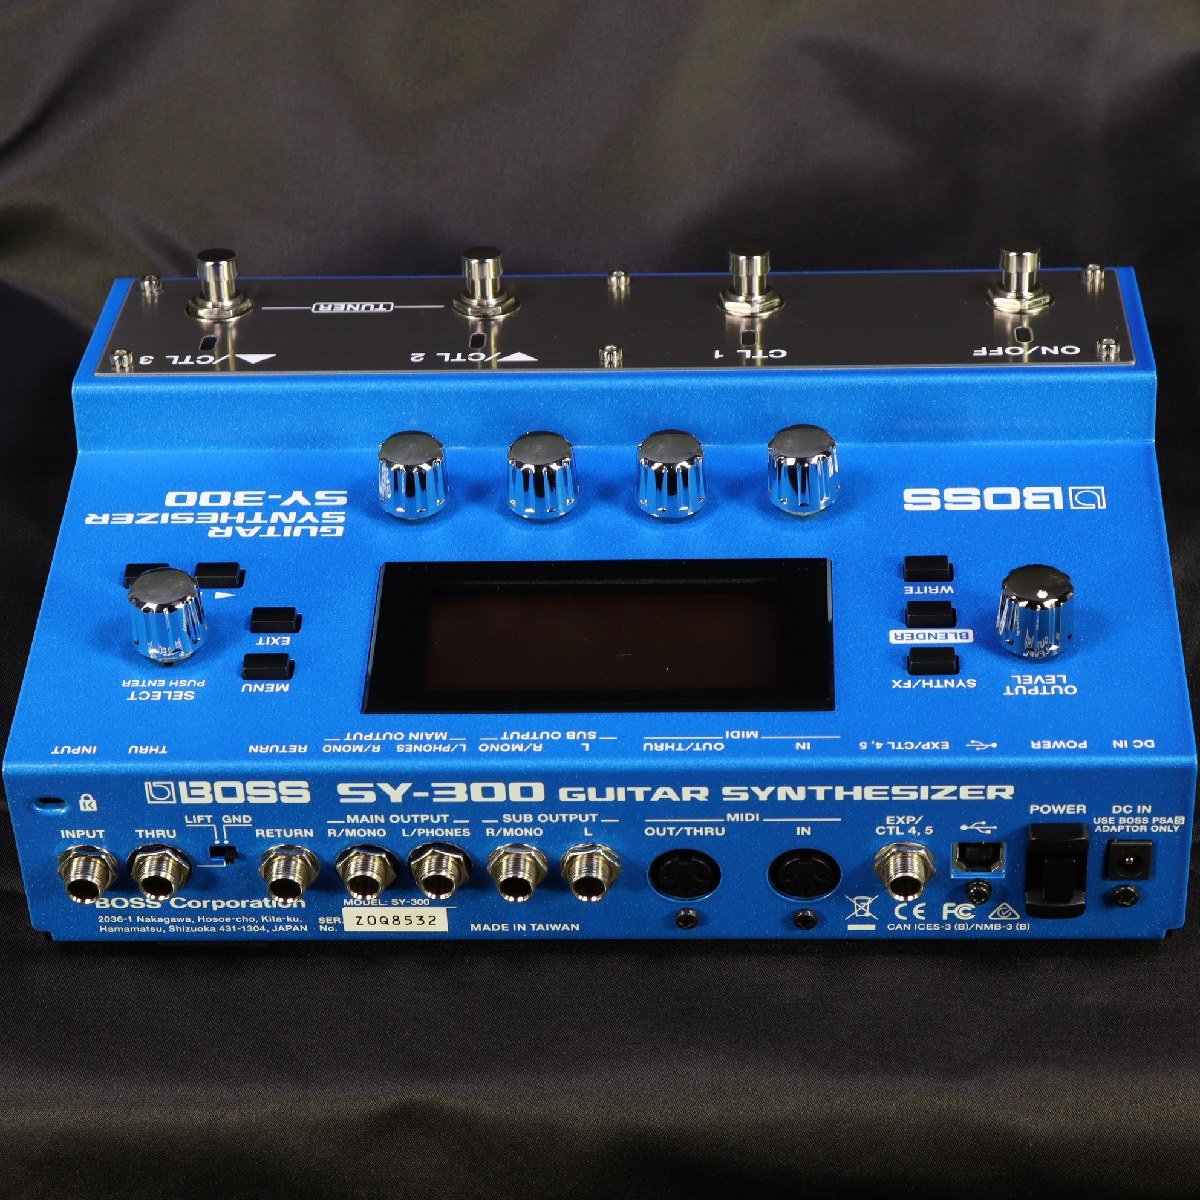 BOSS SY-300 Guitar Synthesizer SY300 ギターシンセサイザー ボス